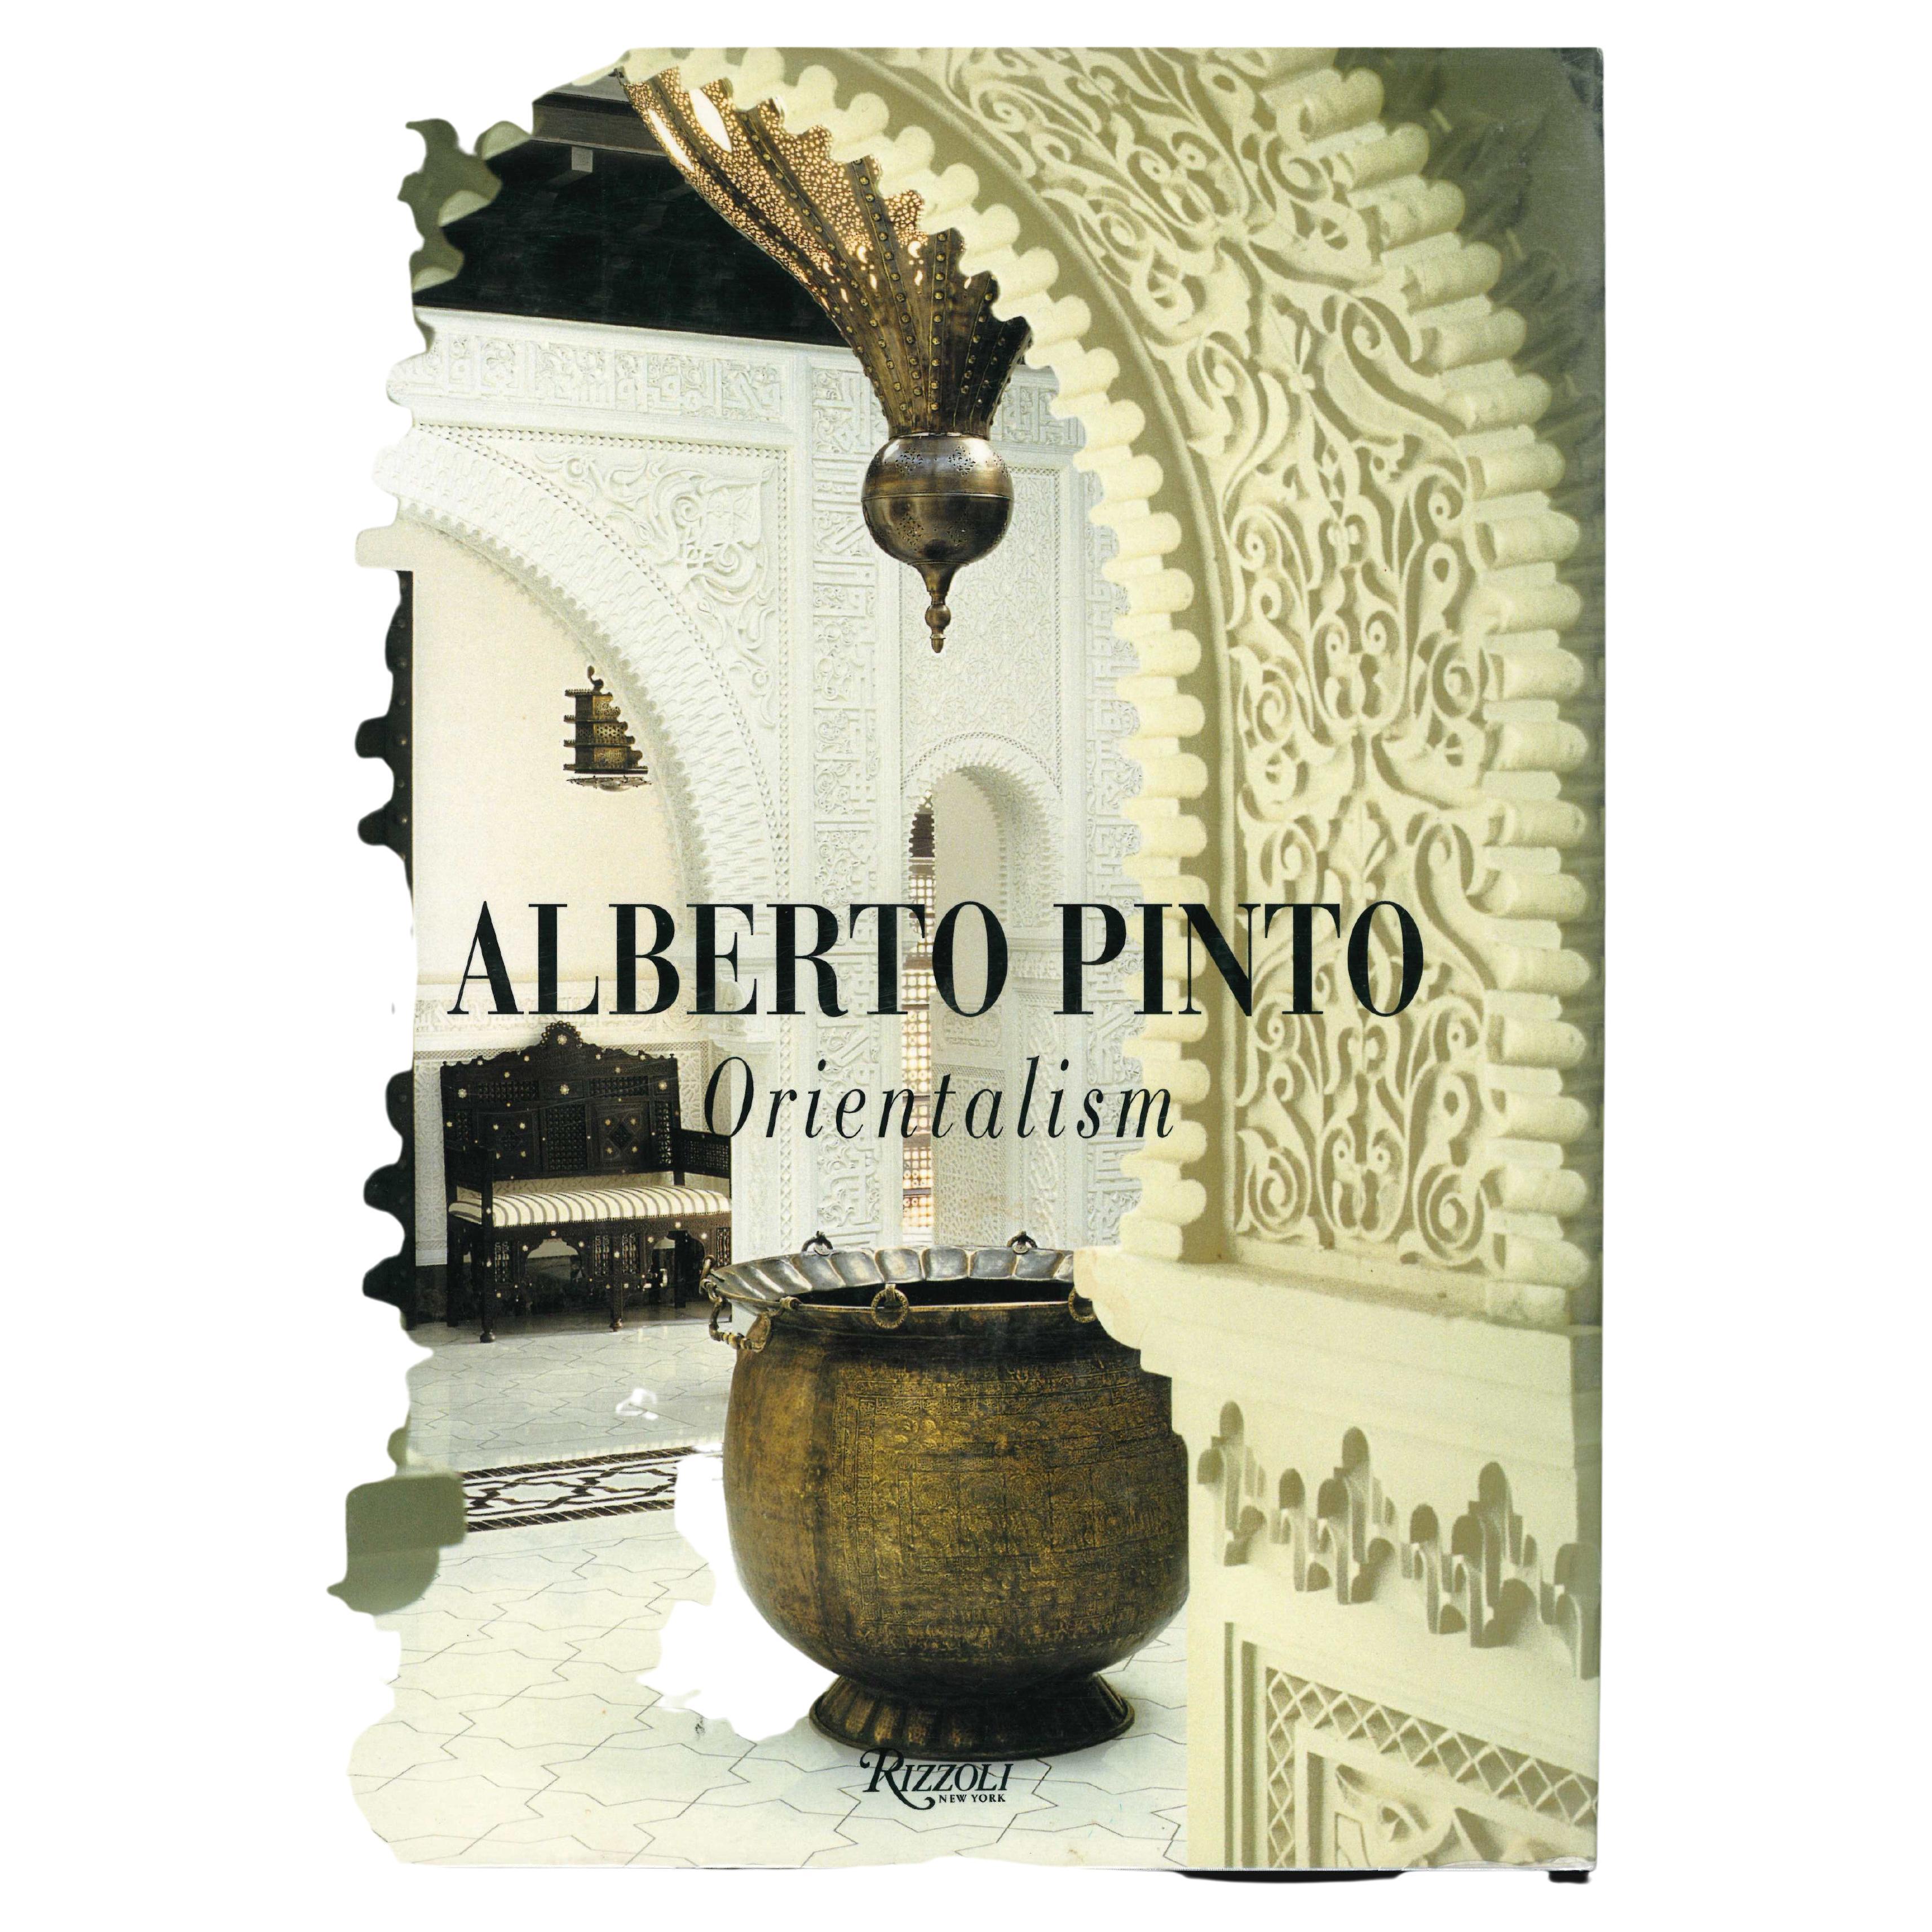 Alberto Pinto was one of the most celebrated interior designers at work in the late 20th century and the early years of the 21st century. In this book he looks to the wonders of the East and a series of interiors inspired by the colors and textures